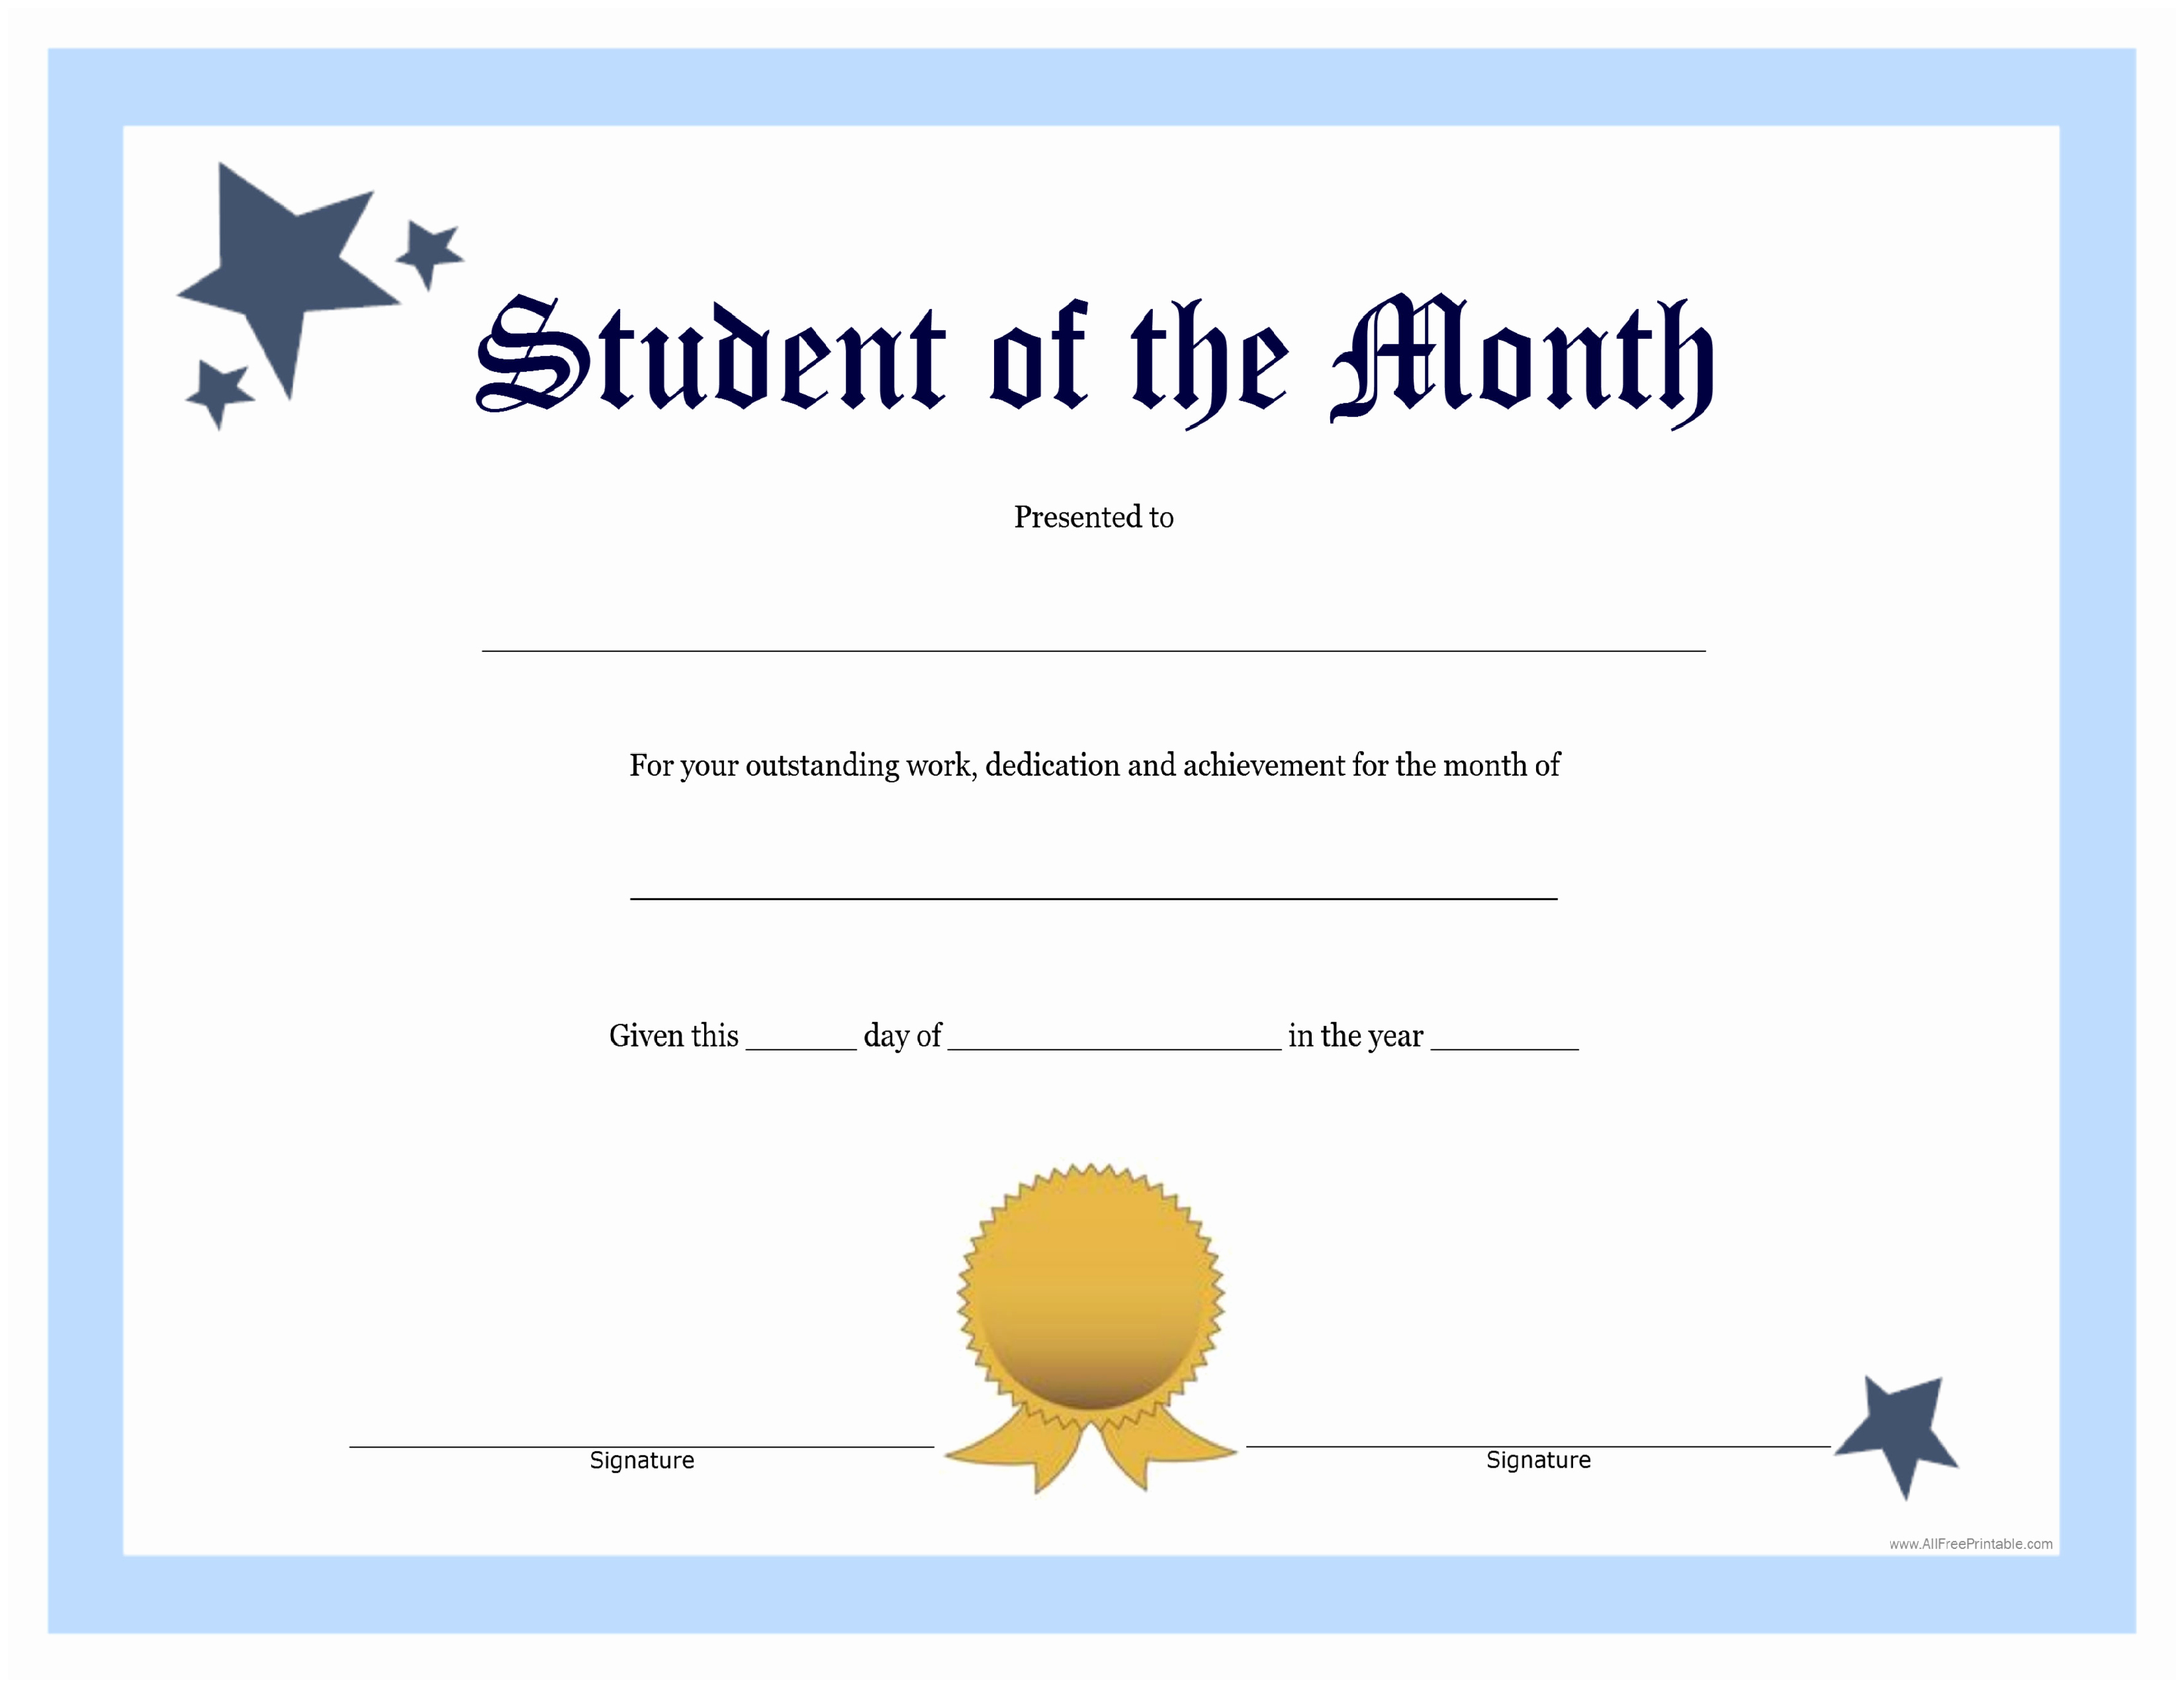 Student Certificate Template Google Docs Lovely Free Student Of the Month Certificate